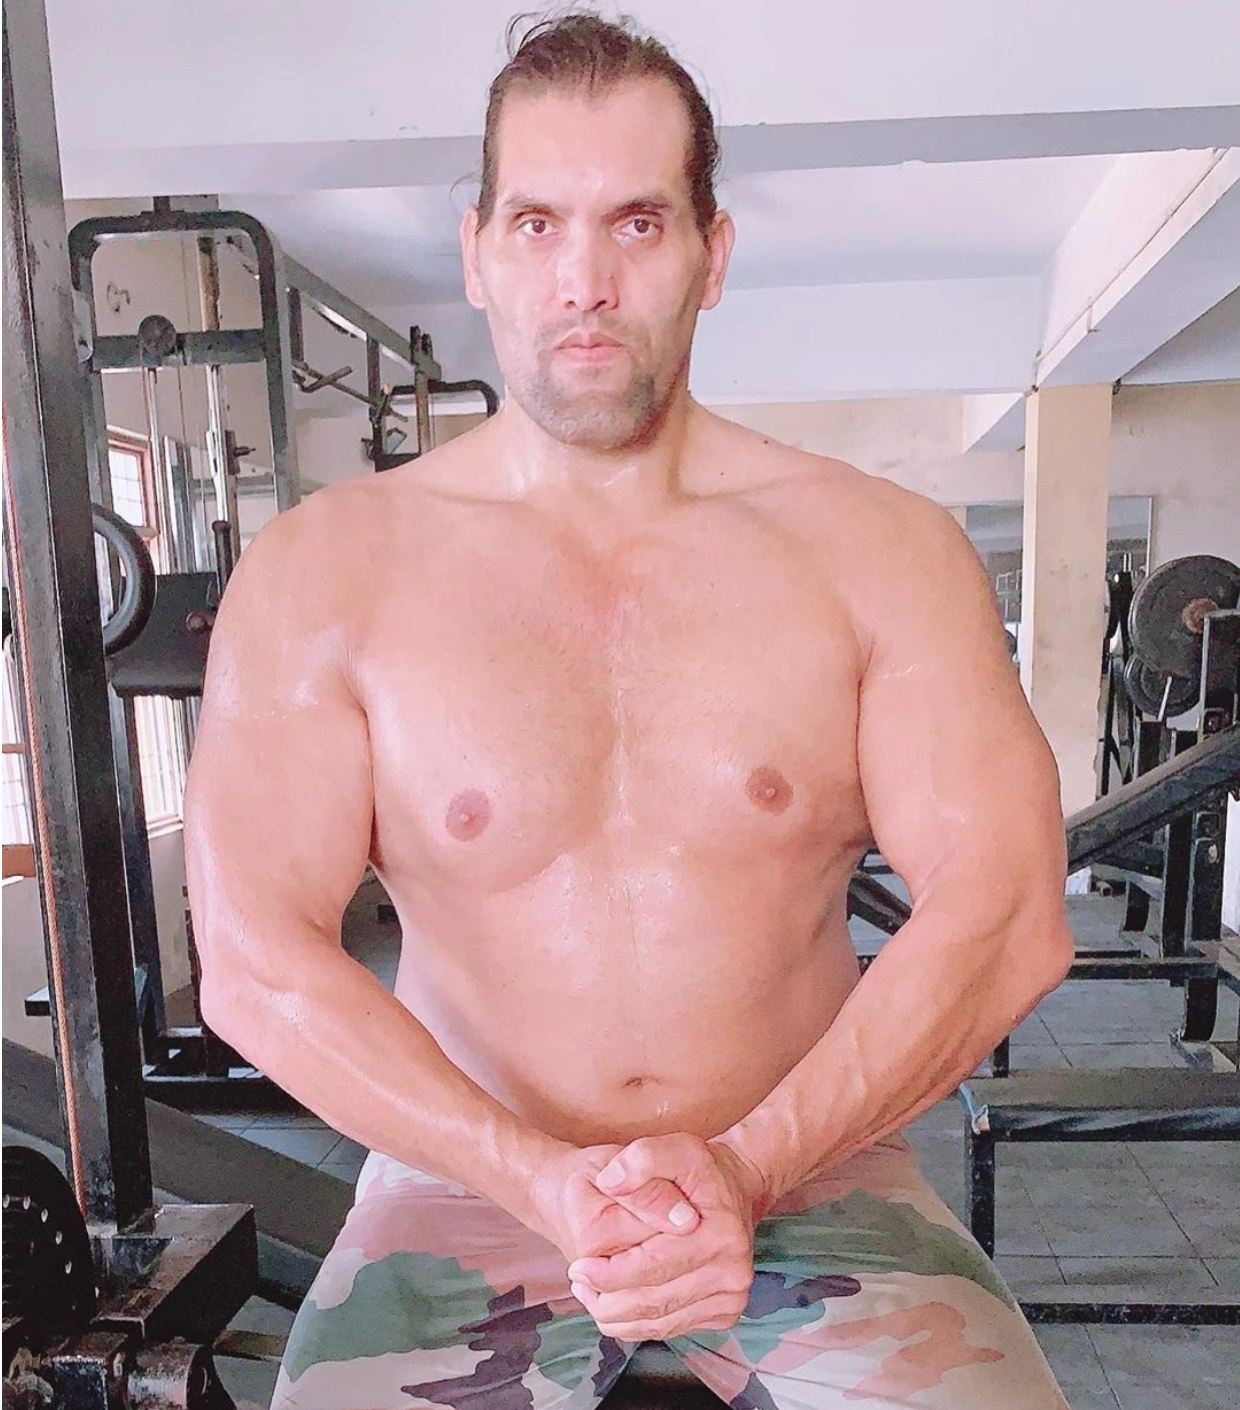 The Great Khali is ripped beyond belief